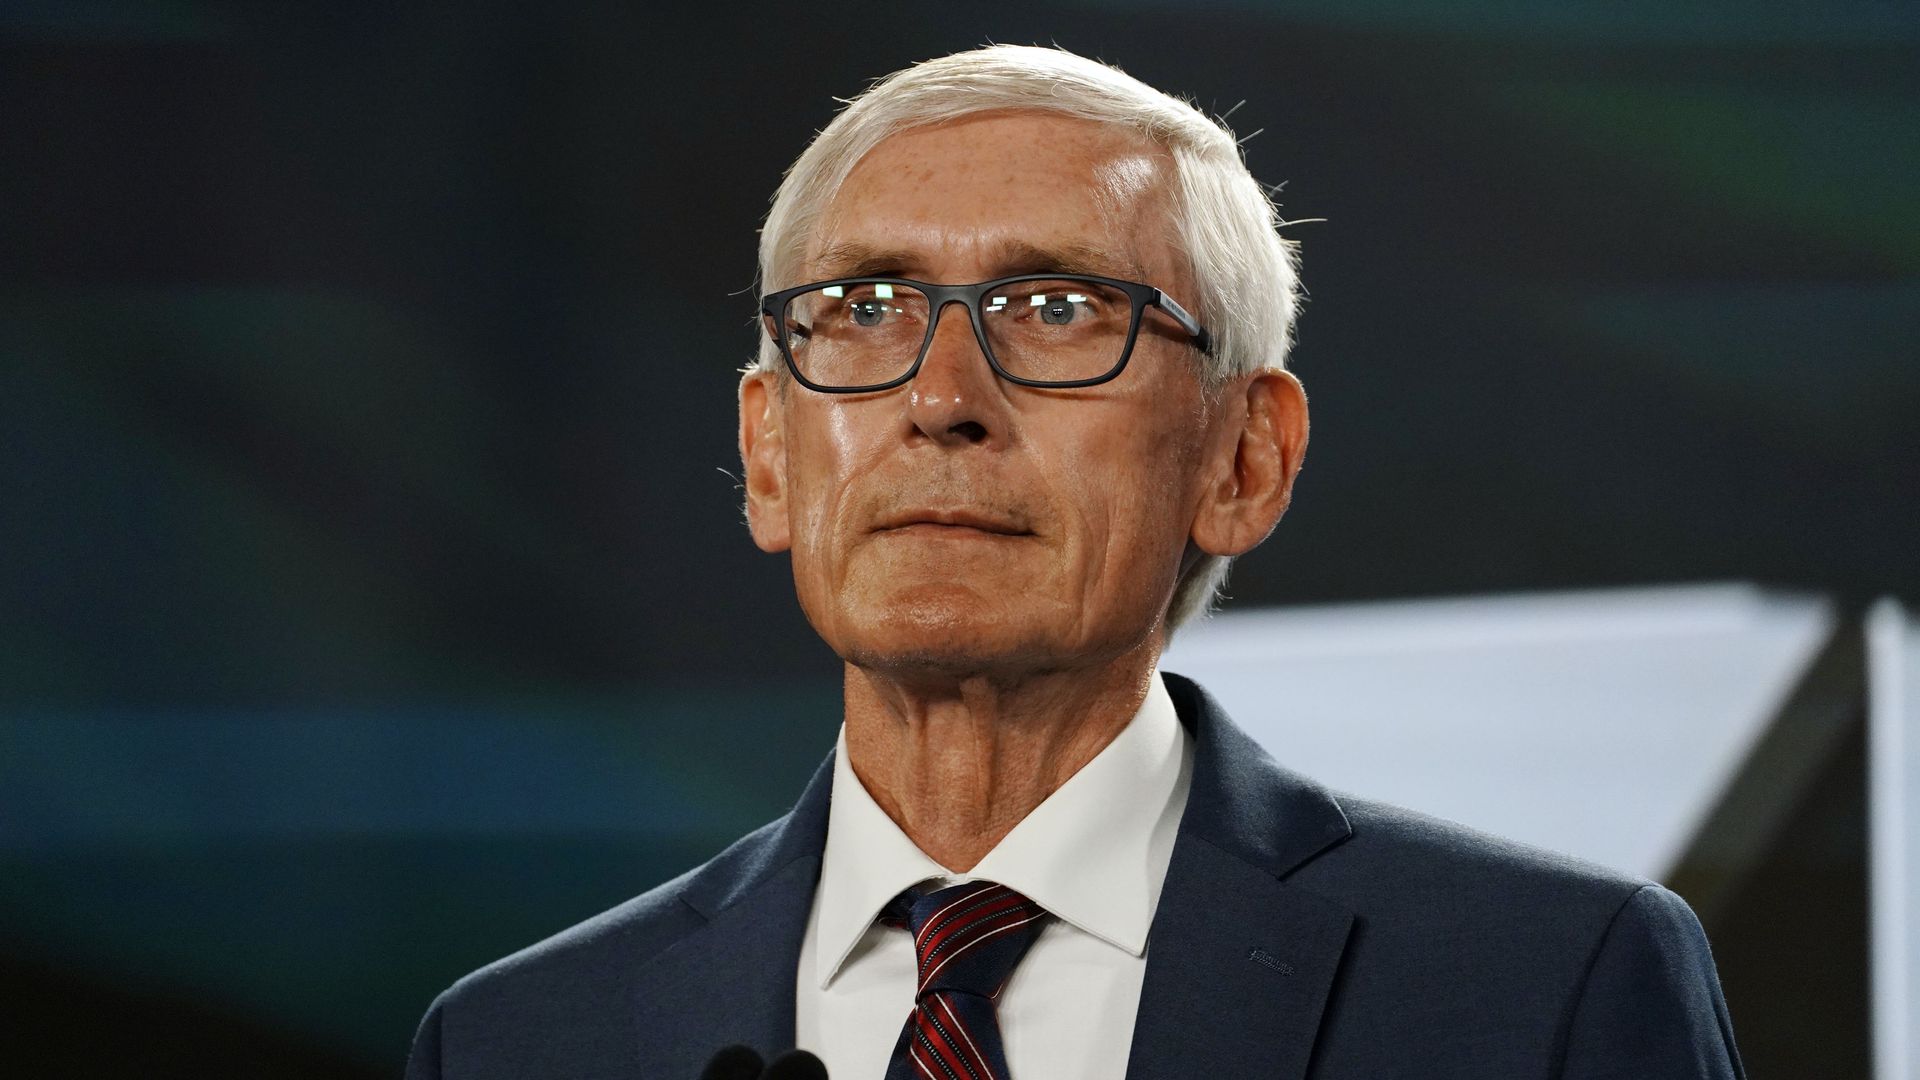 Wisconsin Governor Tony Evers awaits to address the virtual Democratic National Convention, at the Wisconsin Center on August 19, 2020